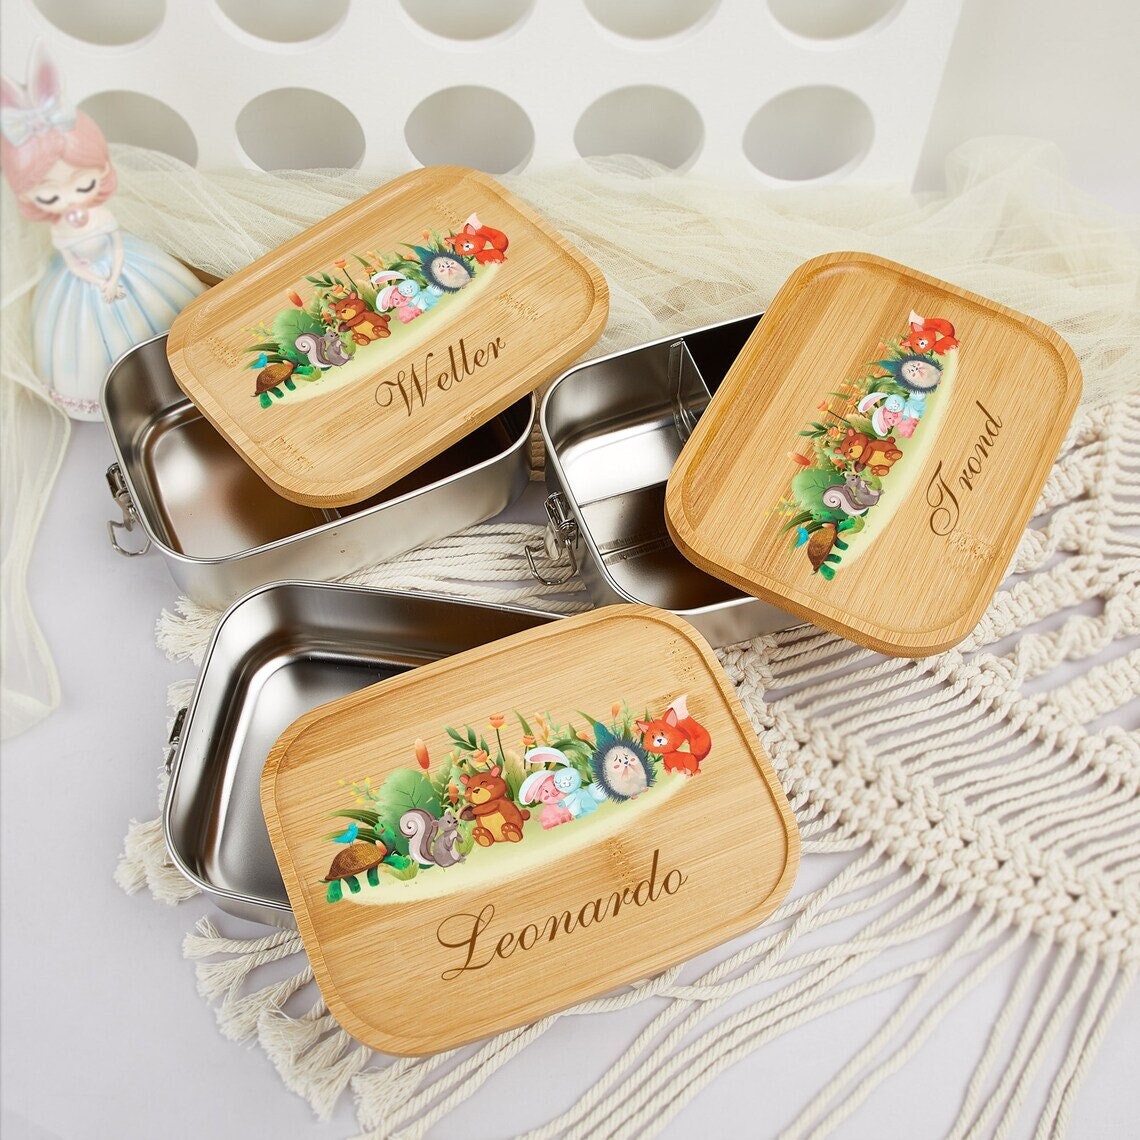 Guprint Custom Made Branded Salad Containers Lunch To Go Box Food